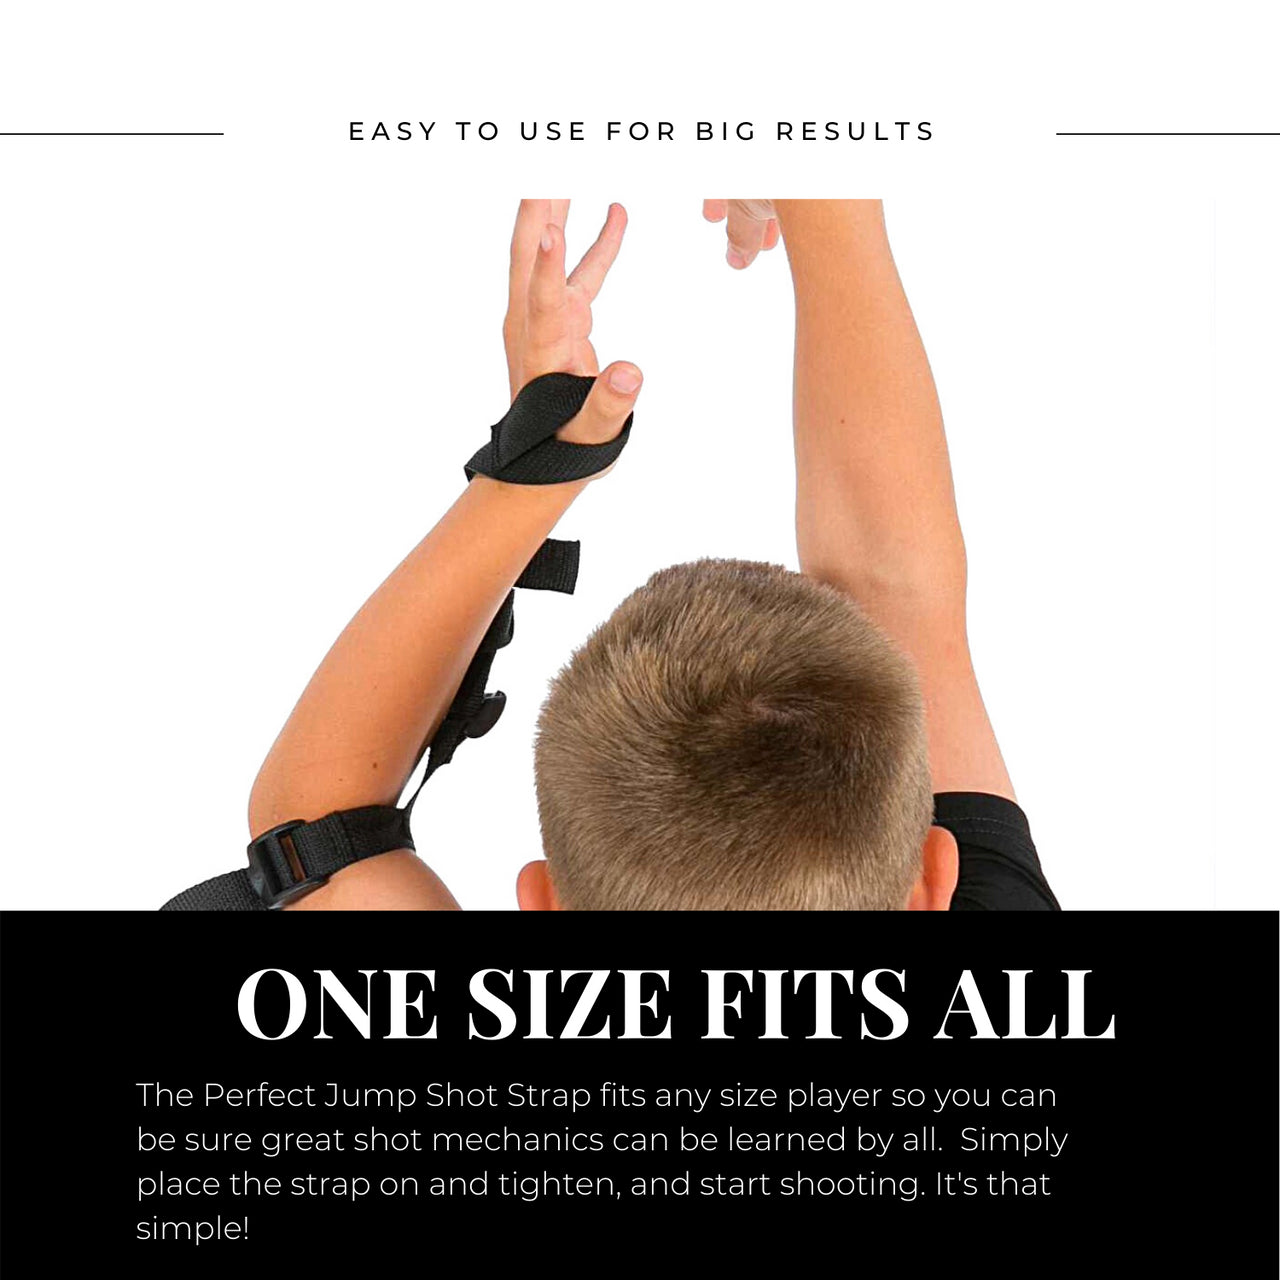 One size fits all basketball shooting aid